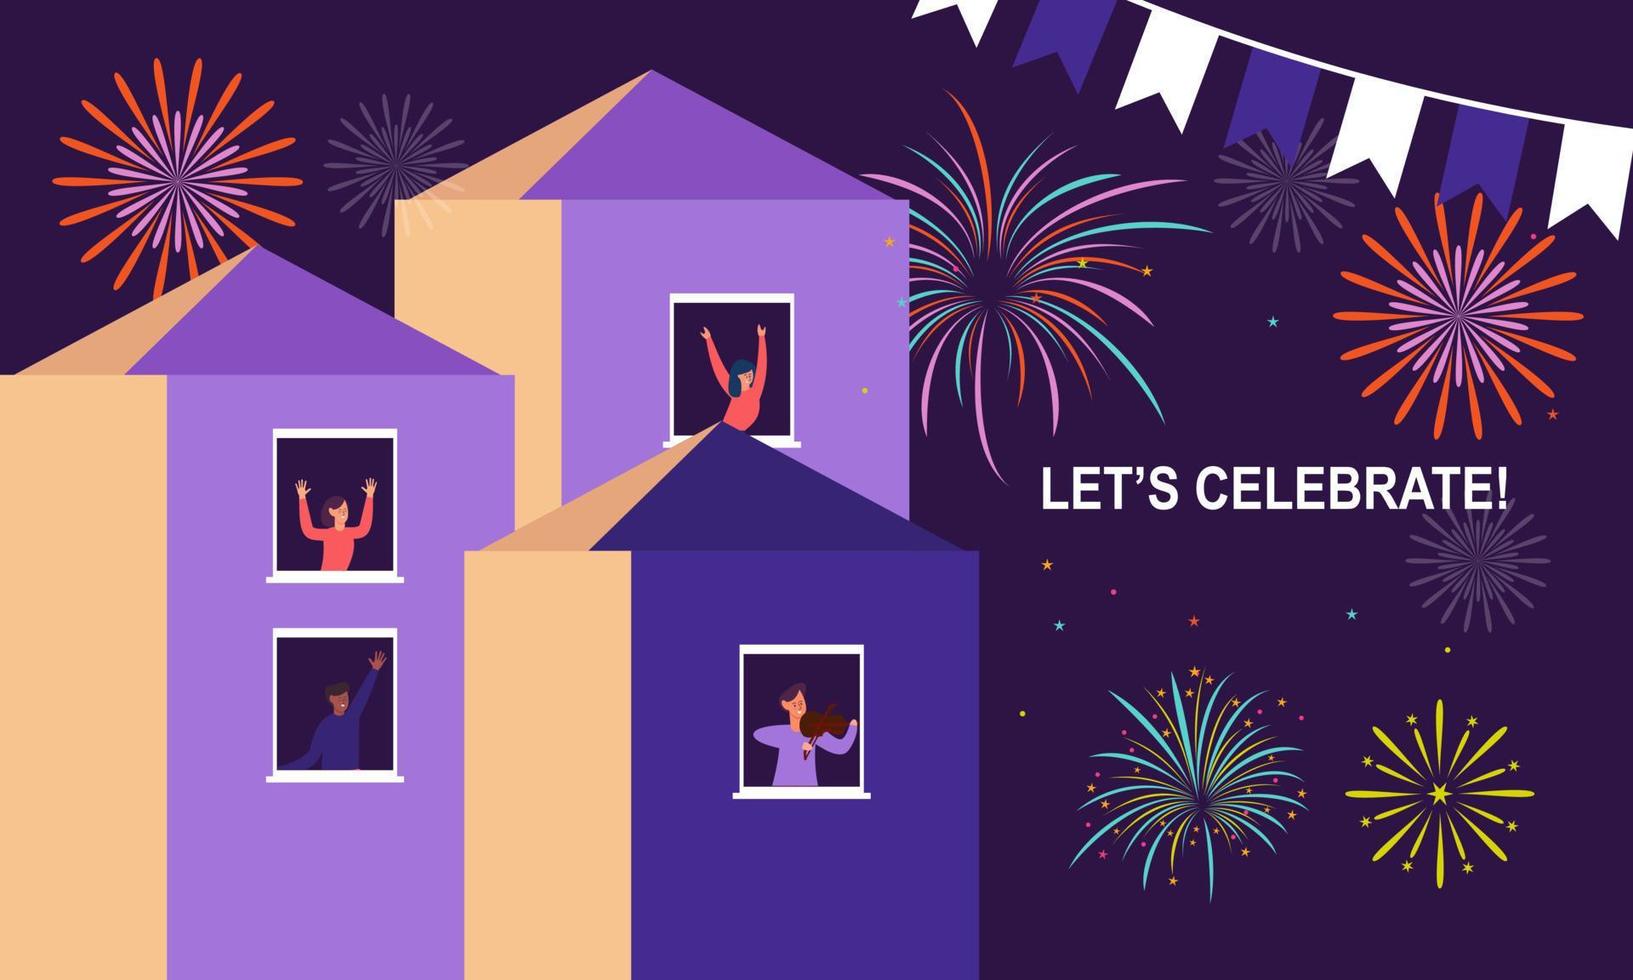 Celebration at home with neighbors. People standing on balconies, looking out of windows. Fireworks, vector